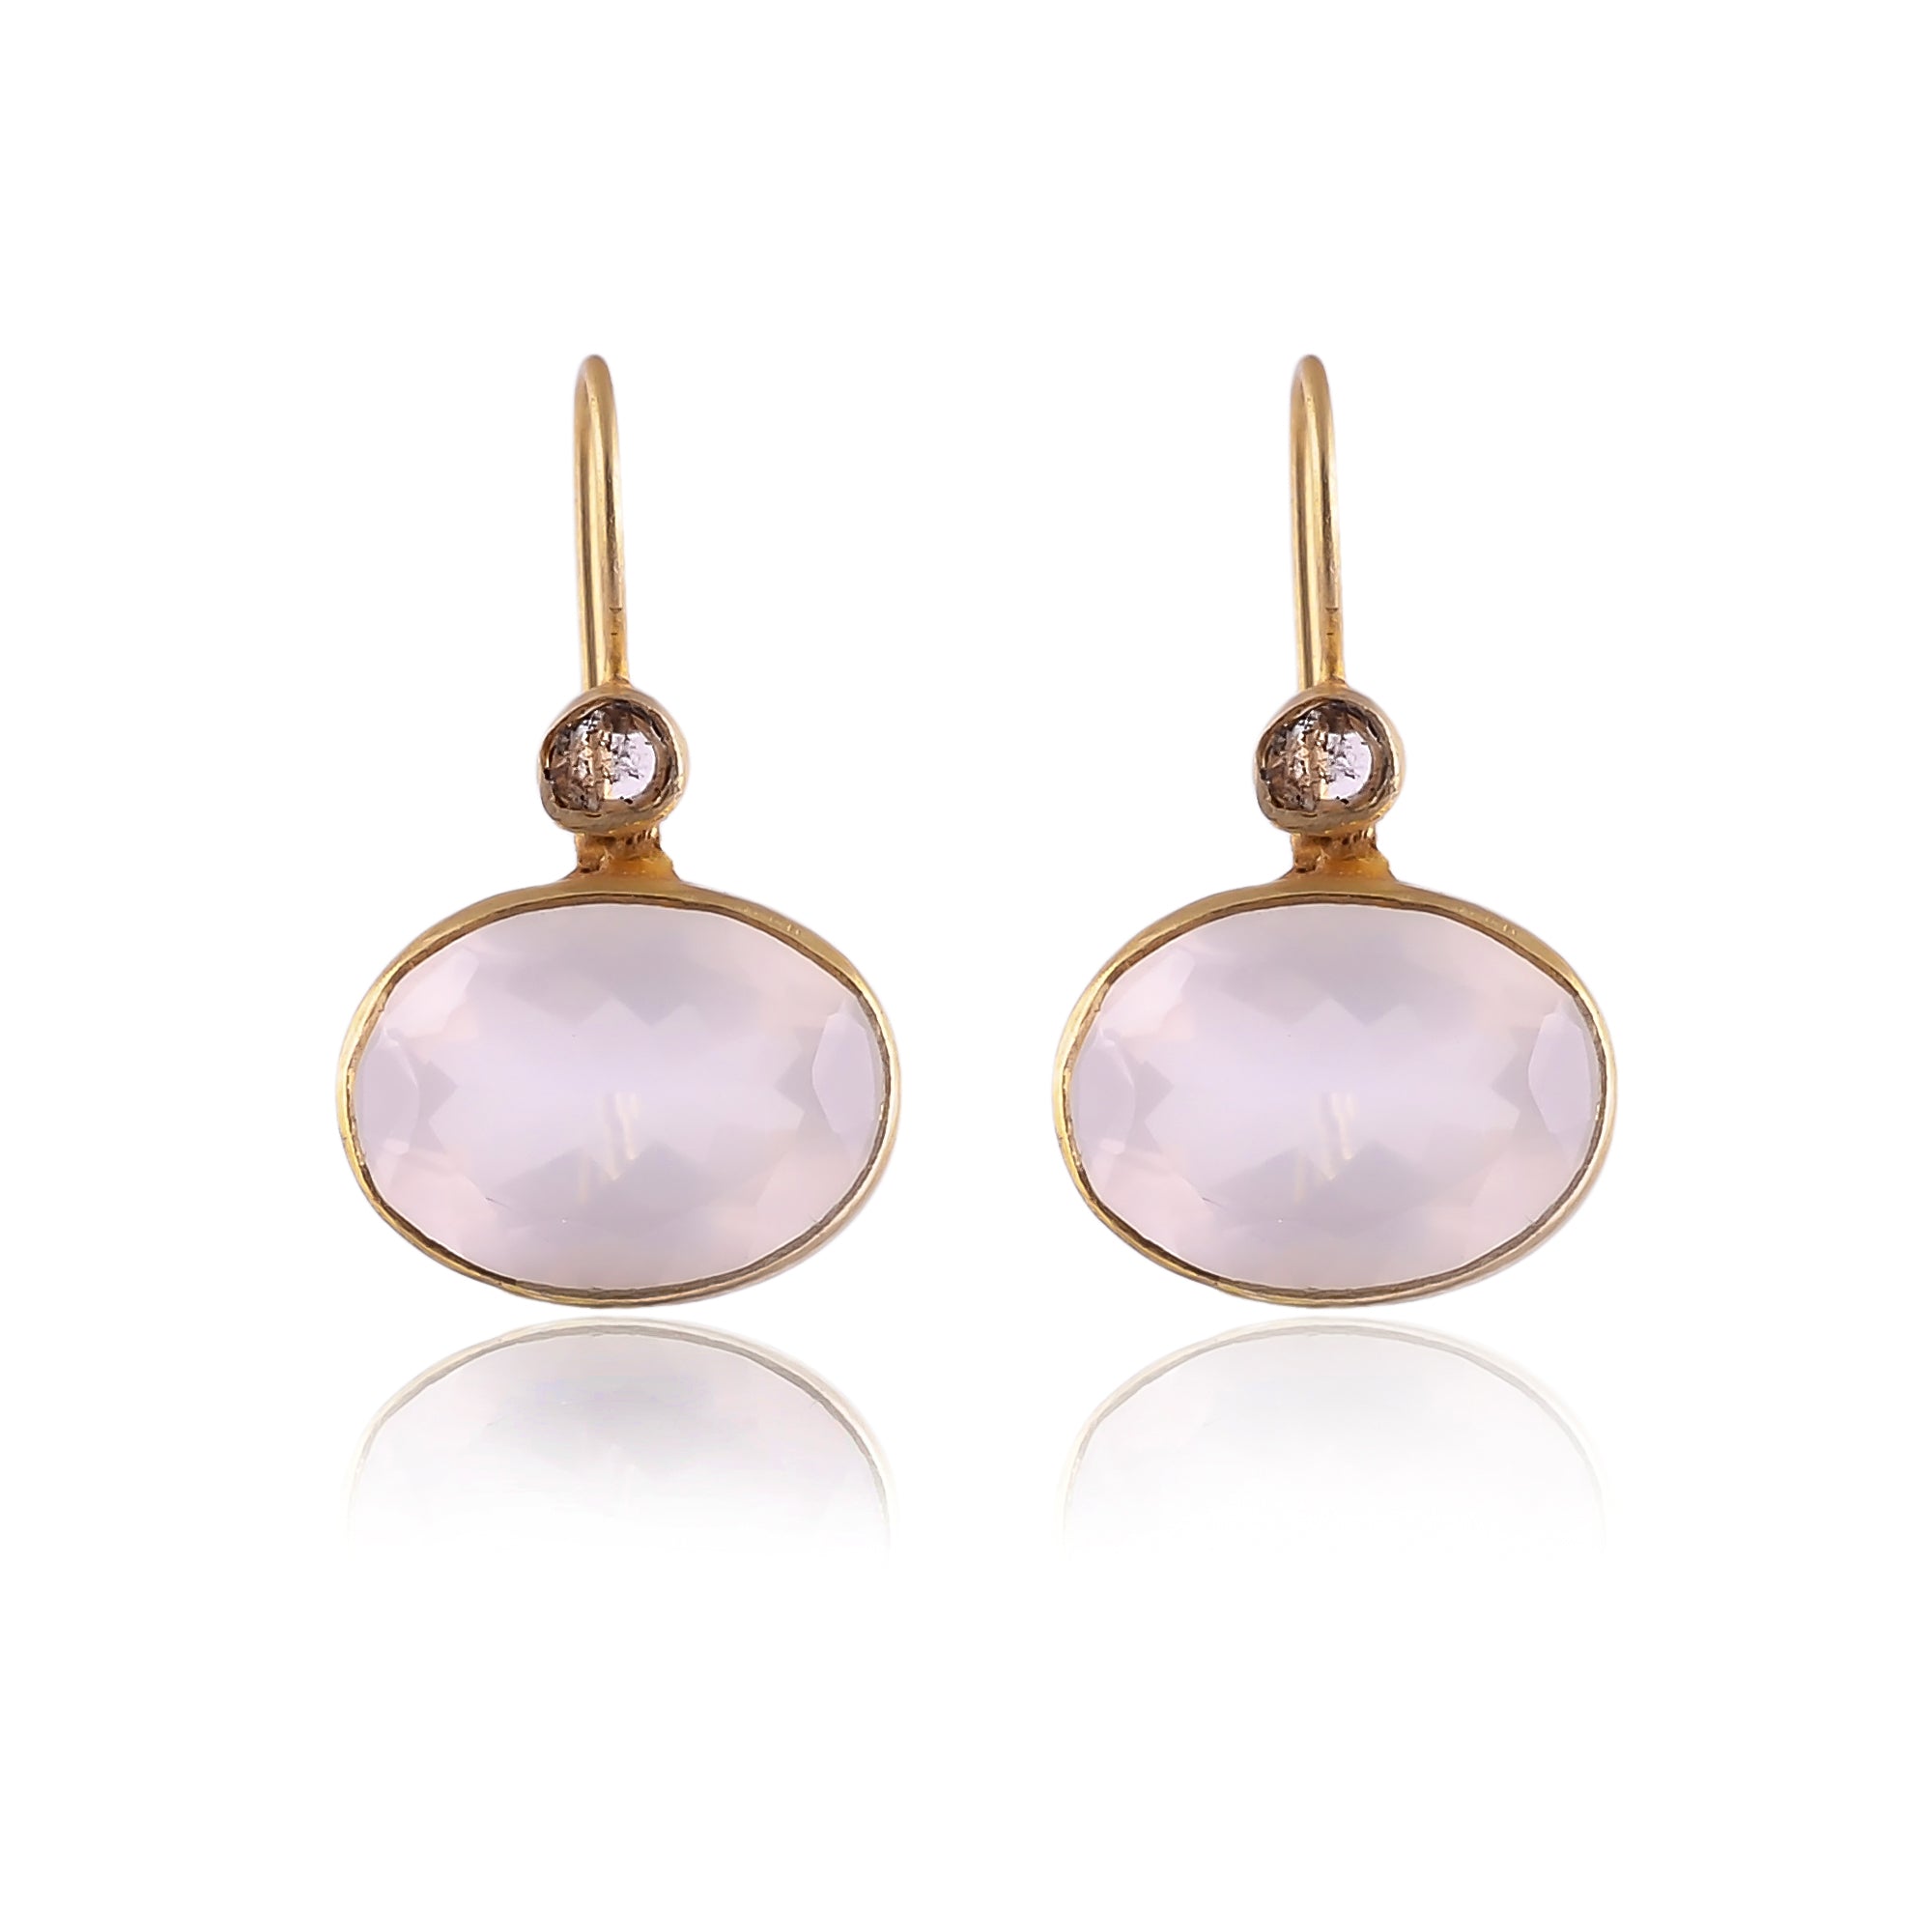 Buy Hand Crafted Silver Glod Plated Rose Quartz/dimond Earring